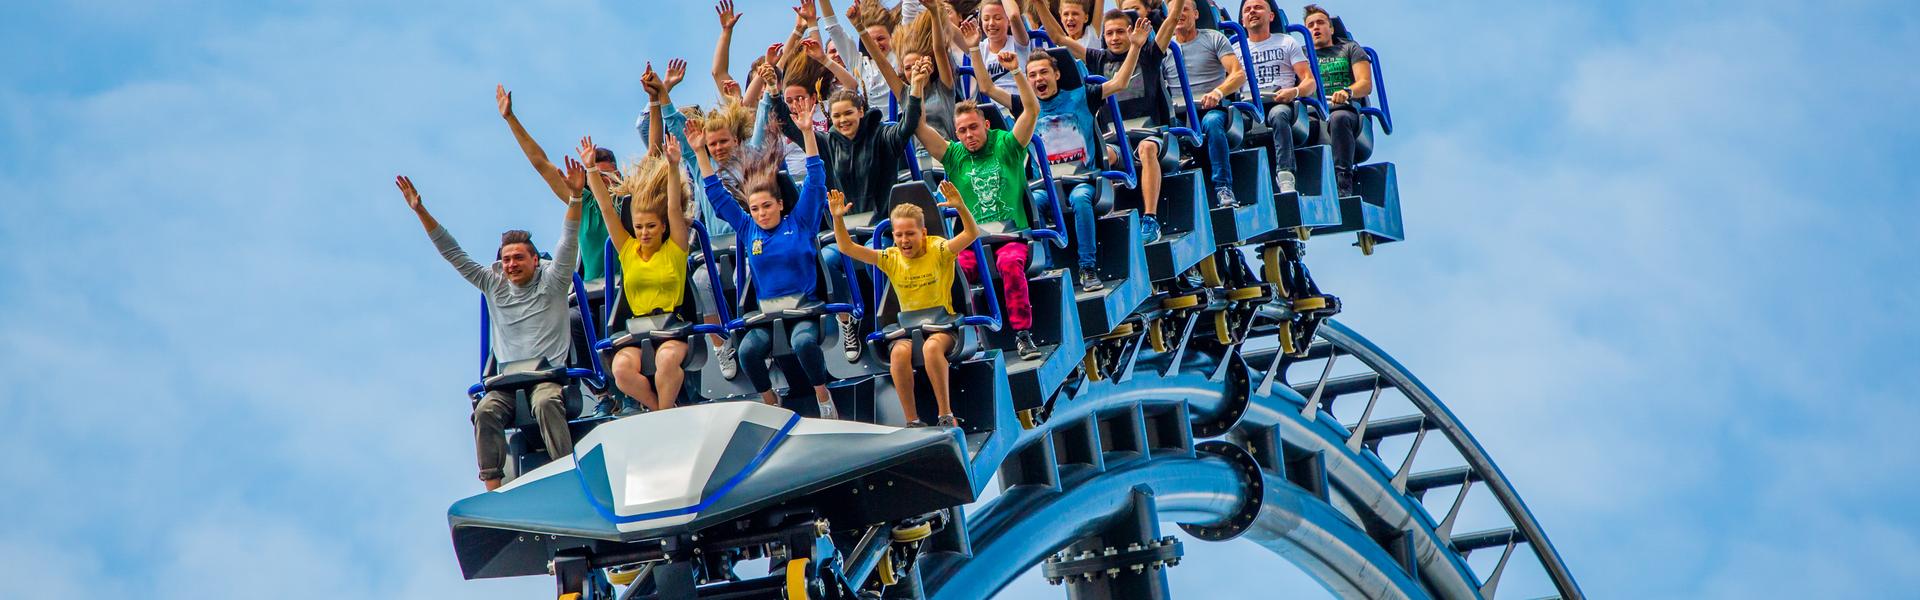 Image: Małopolska’s amusement parks are not only for children